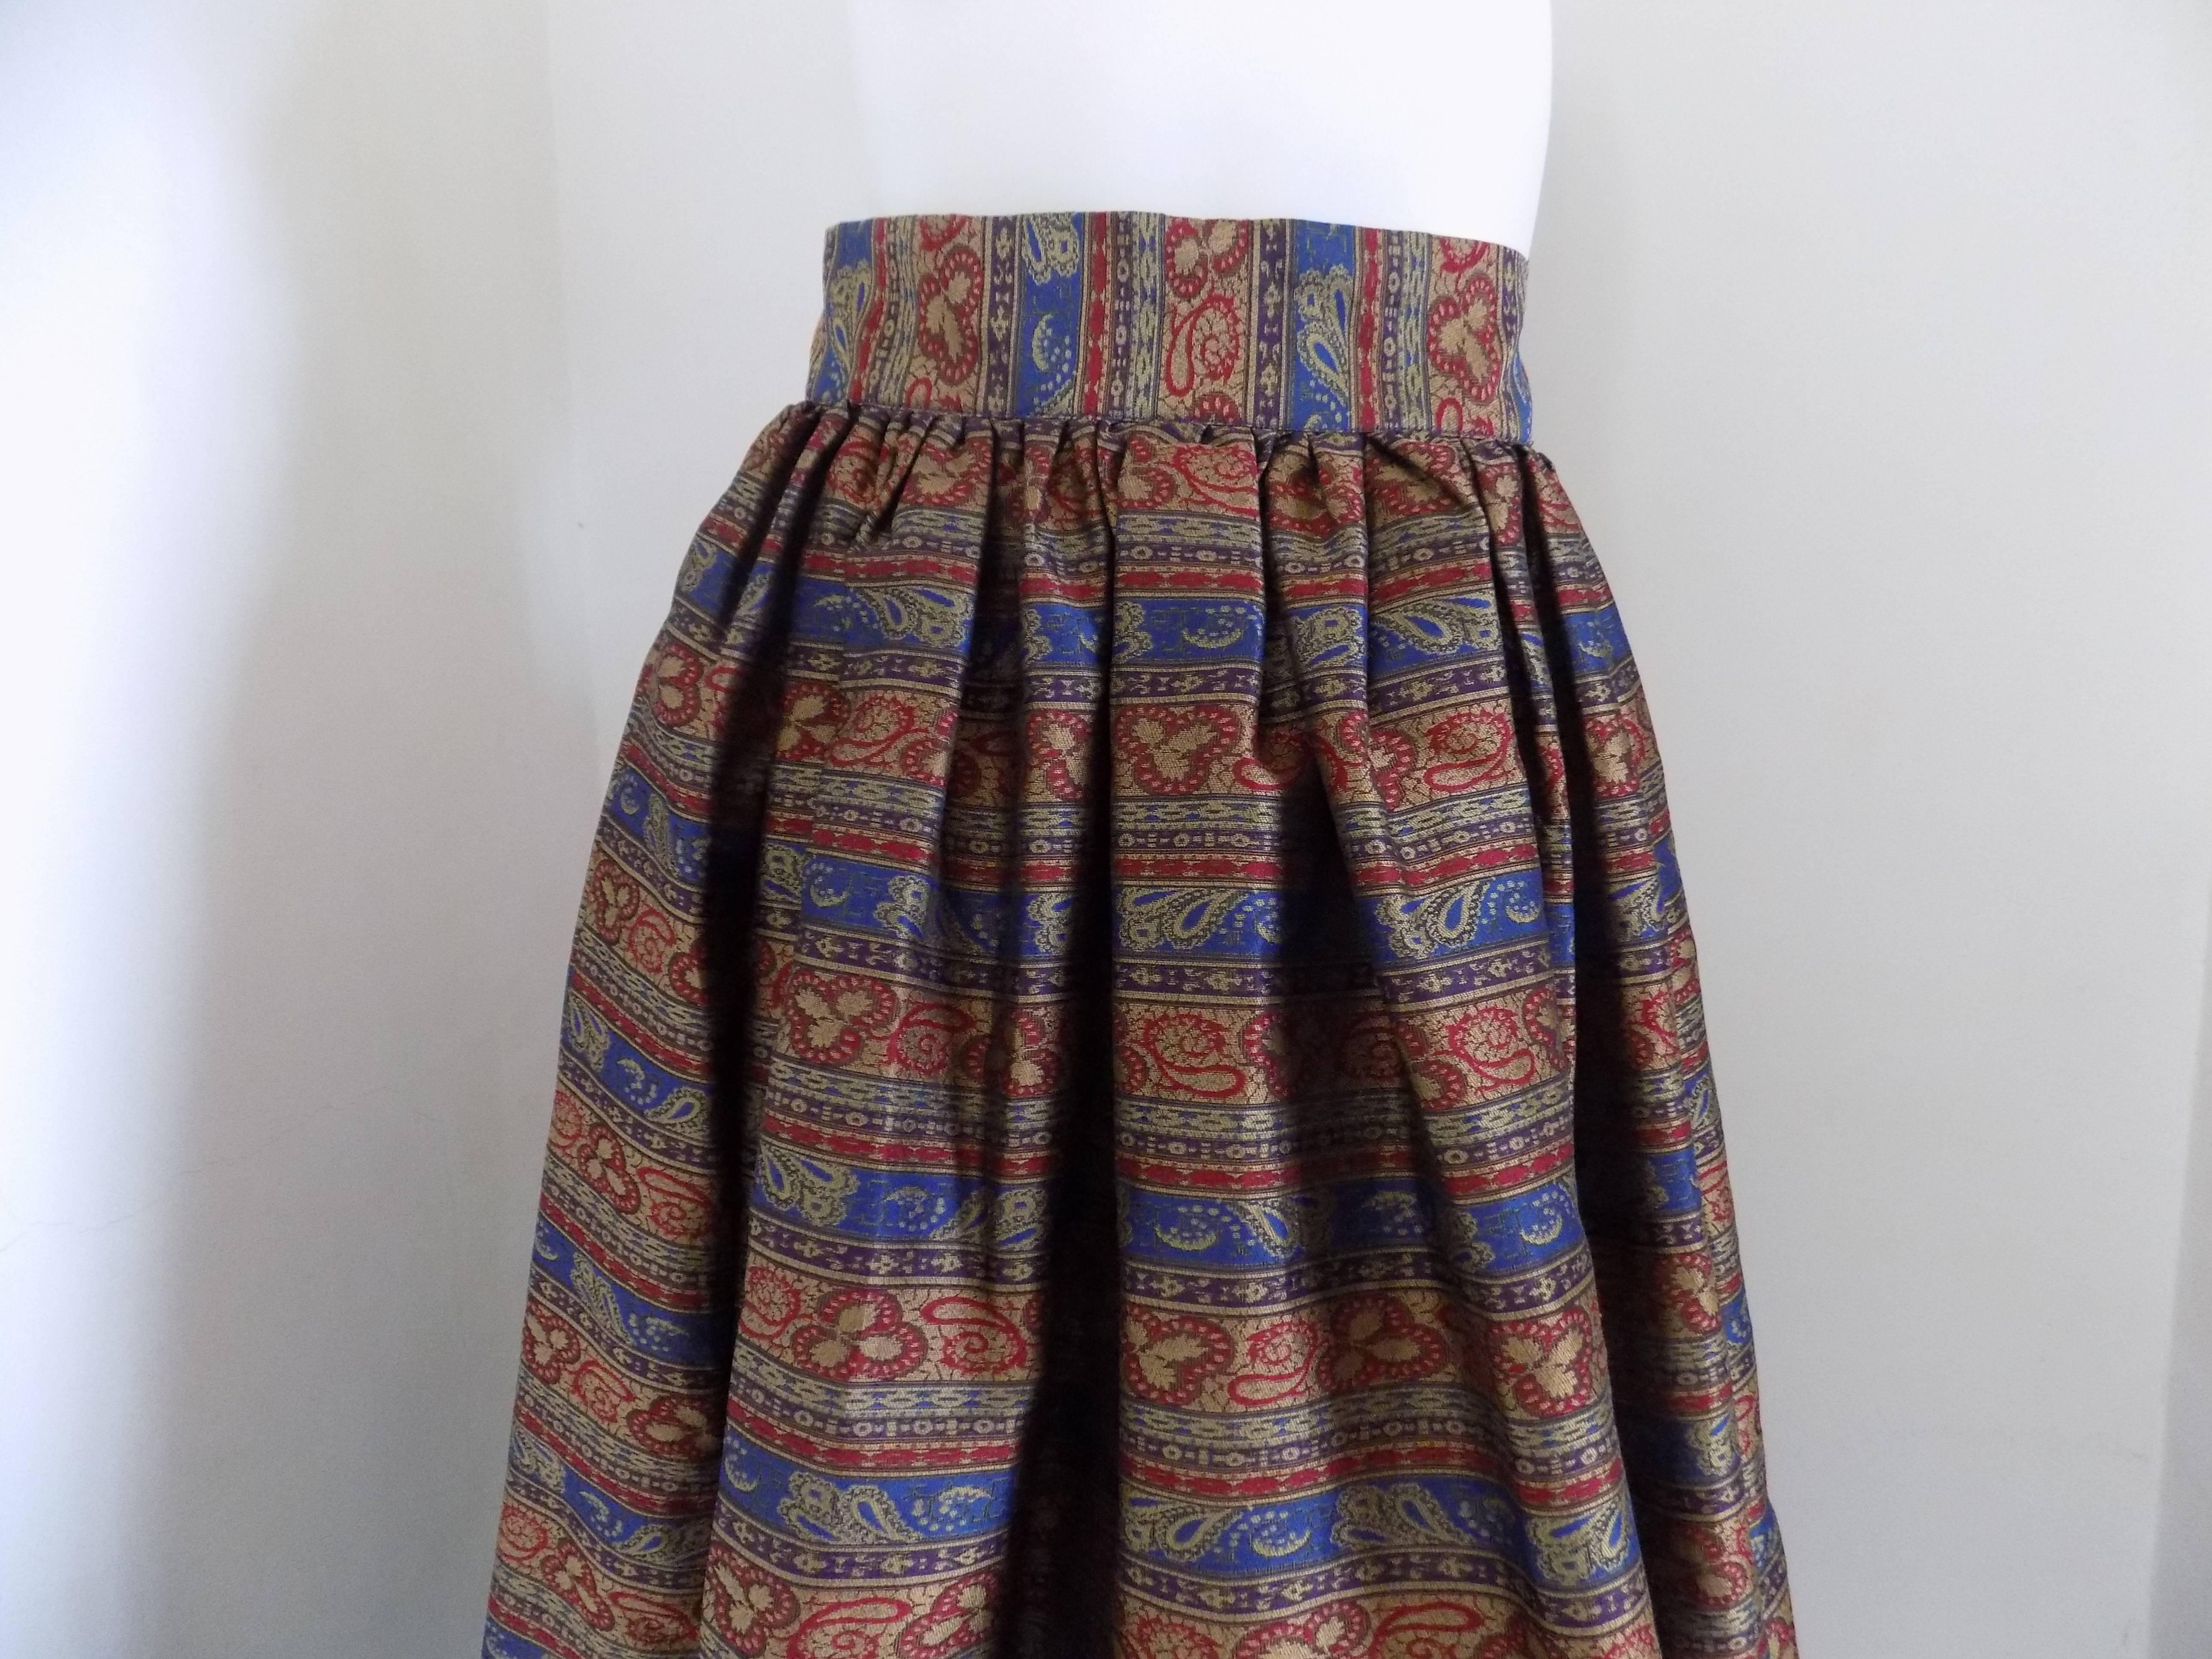 Quid multicolored long skirt
totall made in ital in italian size range M 
Blu red and gold high waist skirt